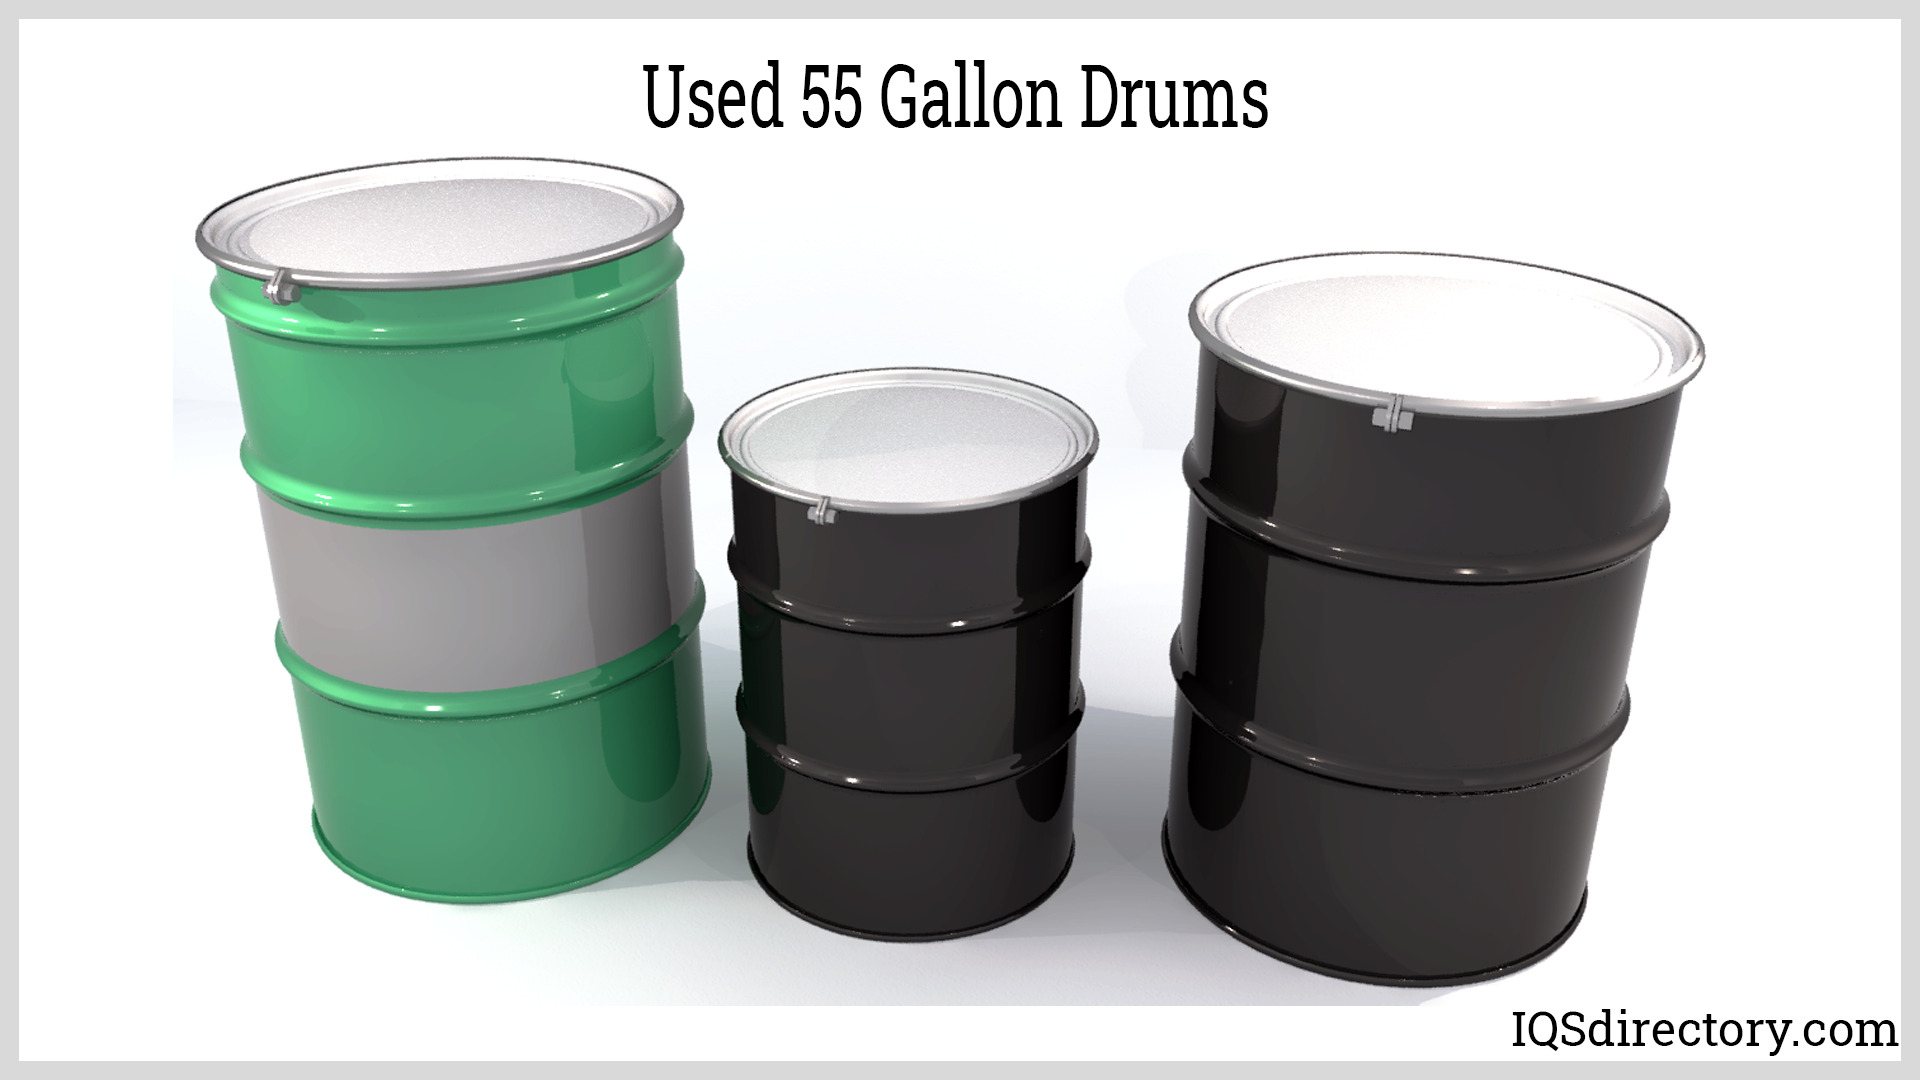 Used 55 Gallon Drums